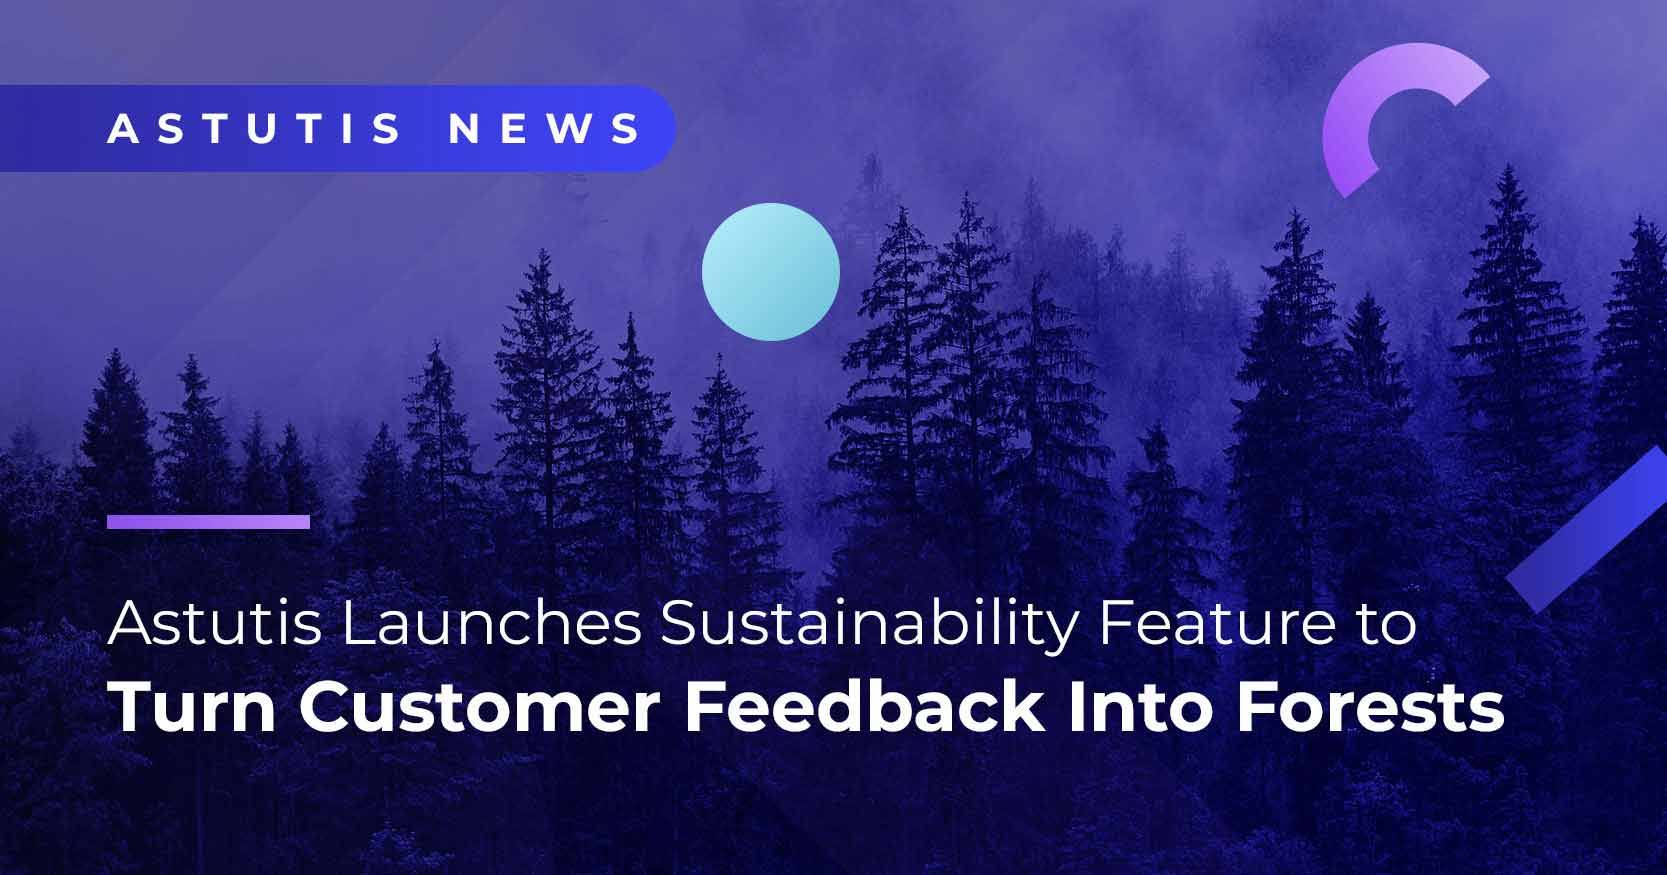 Astutis Launches Sustainability Feature to Turn Customer Feedback into Forests